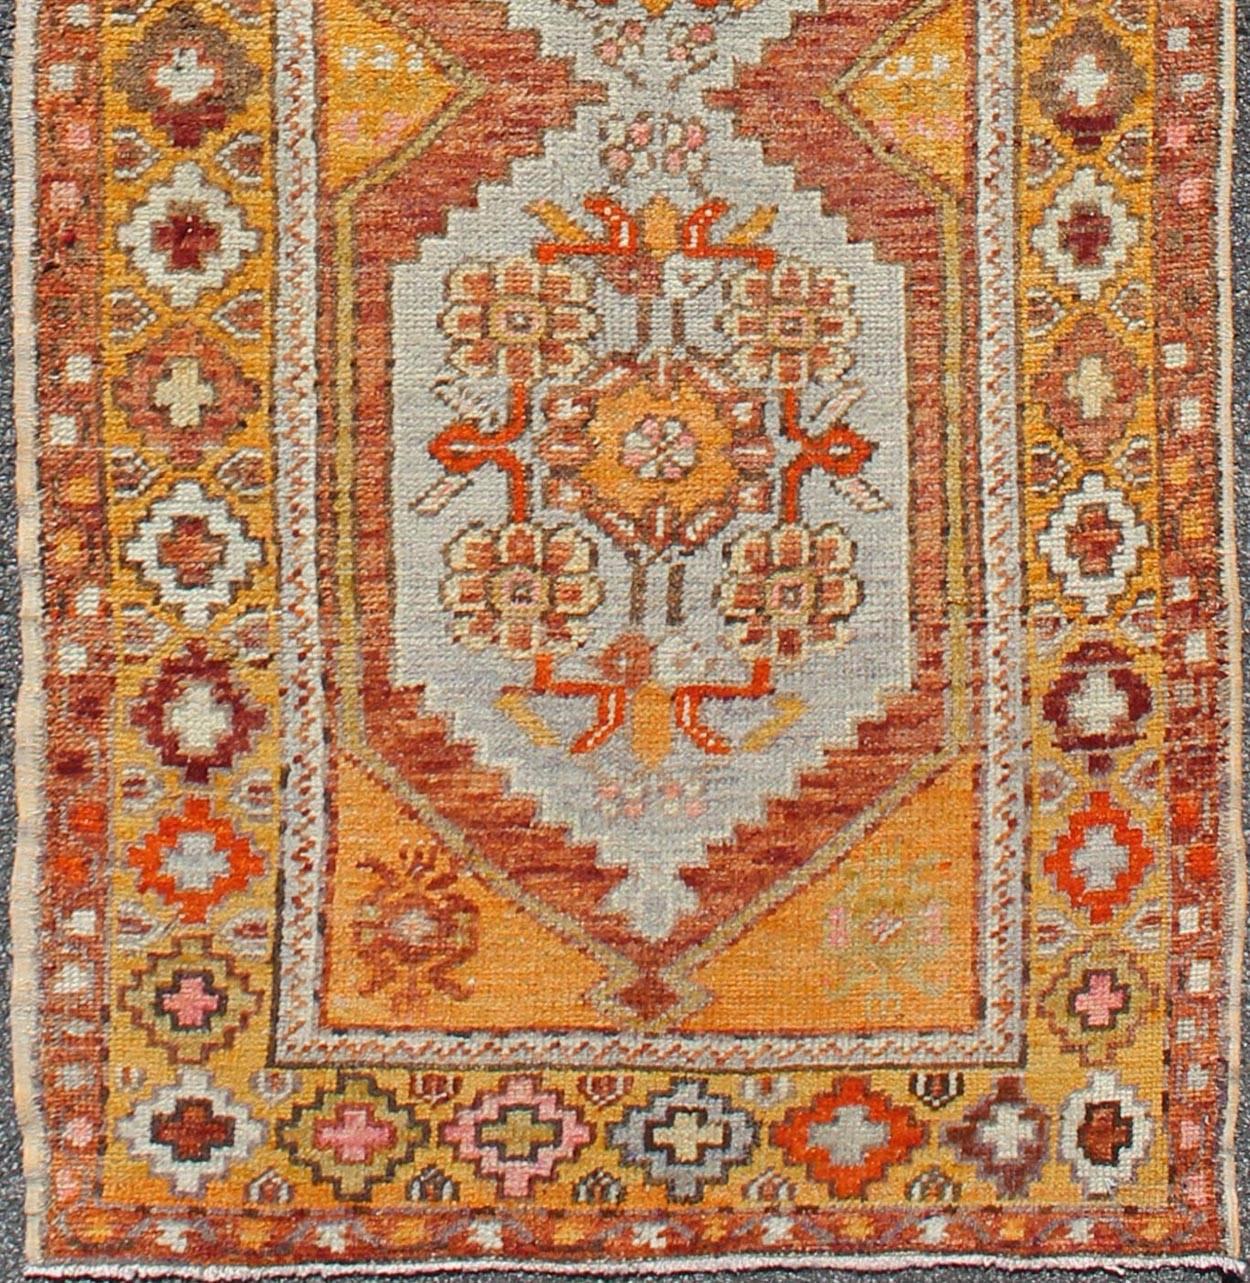 Colorful antique Turkish runner with four medallions in yellow, red, green, gray, rug en-486, country of origin / type: turkey / Oushak, circa 1930s 

This beautiful antique Oushak runner from early 20th century turkey features a classic Oushak